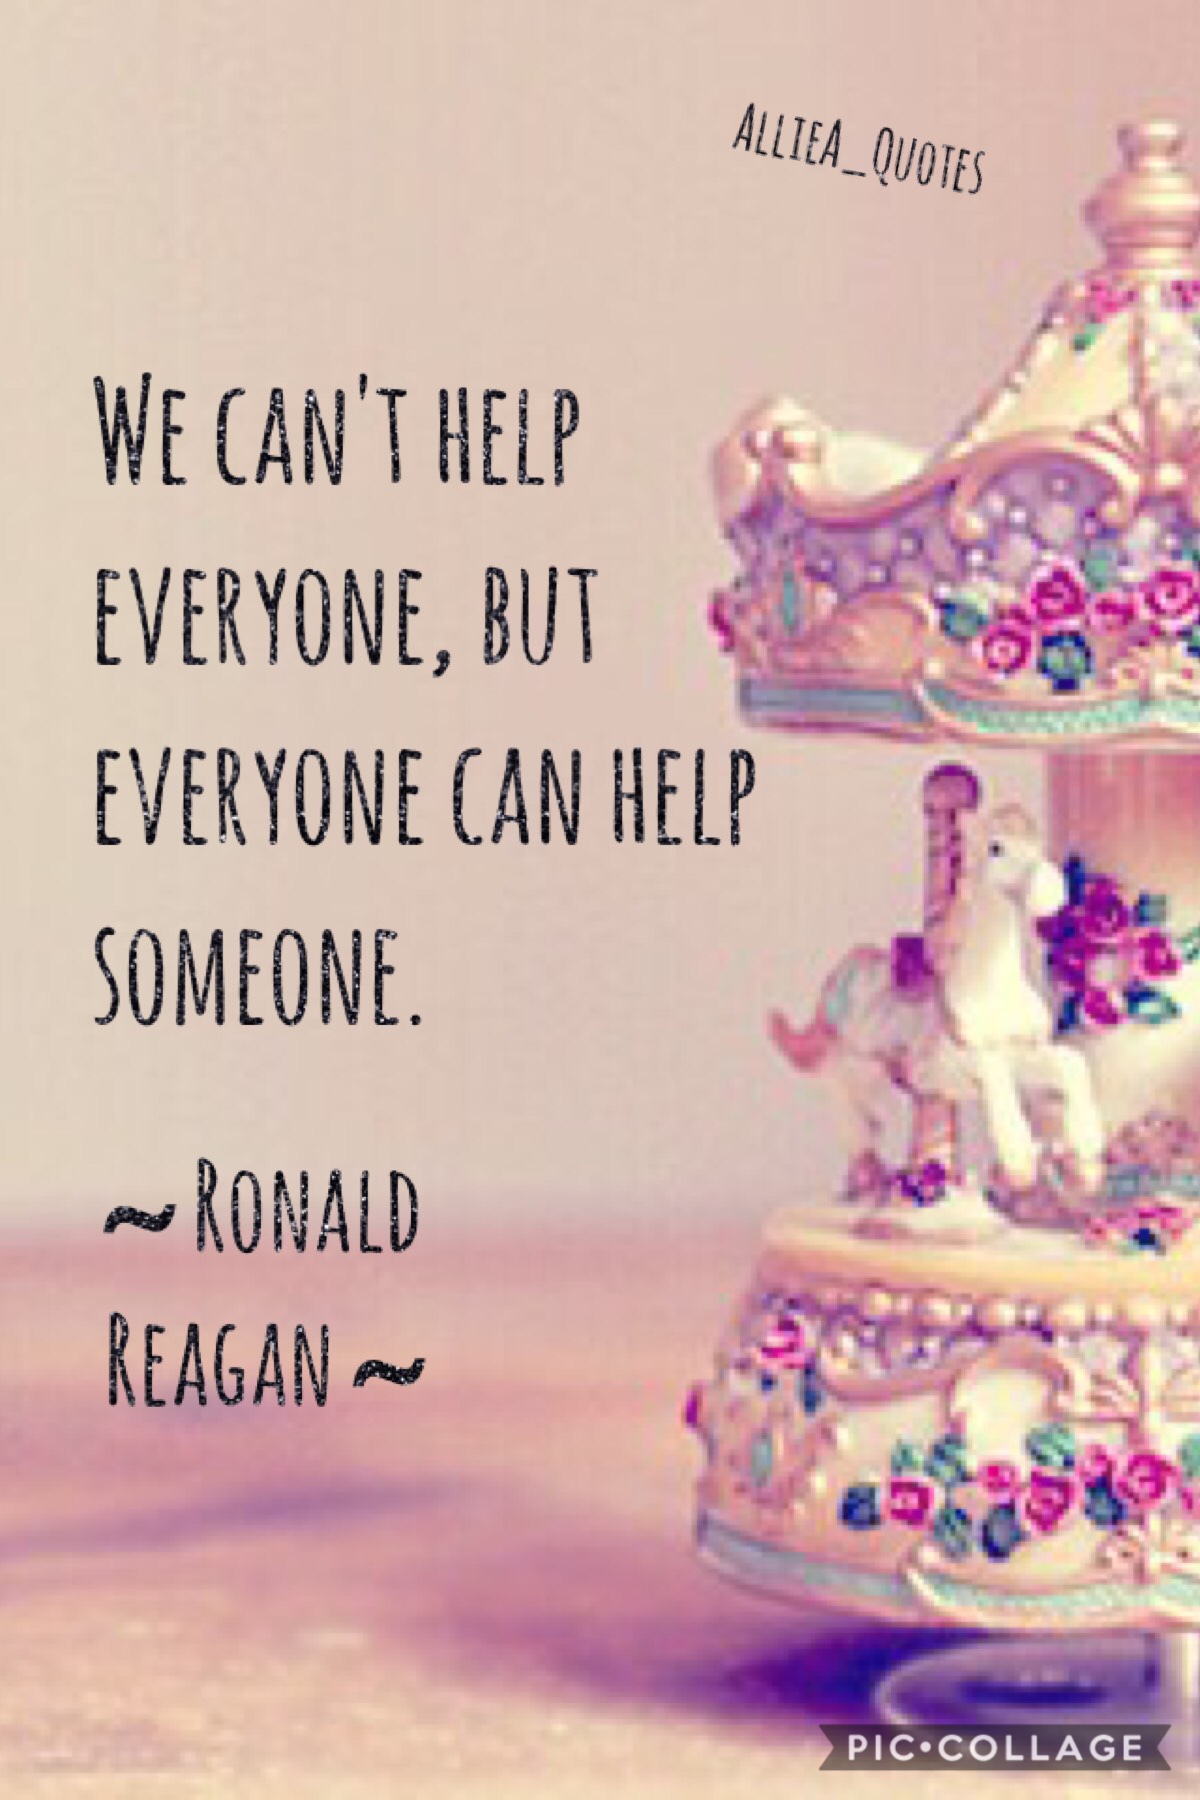 Help others today and everyday after.